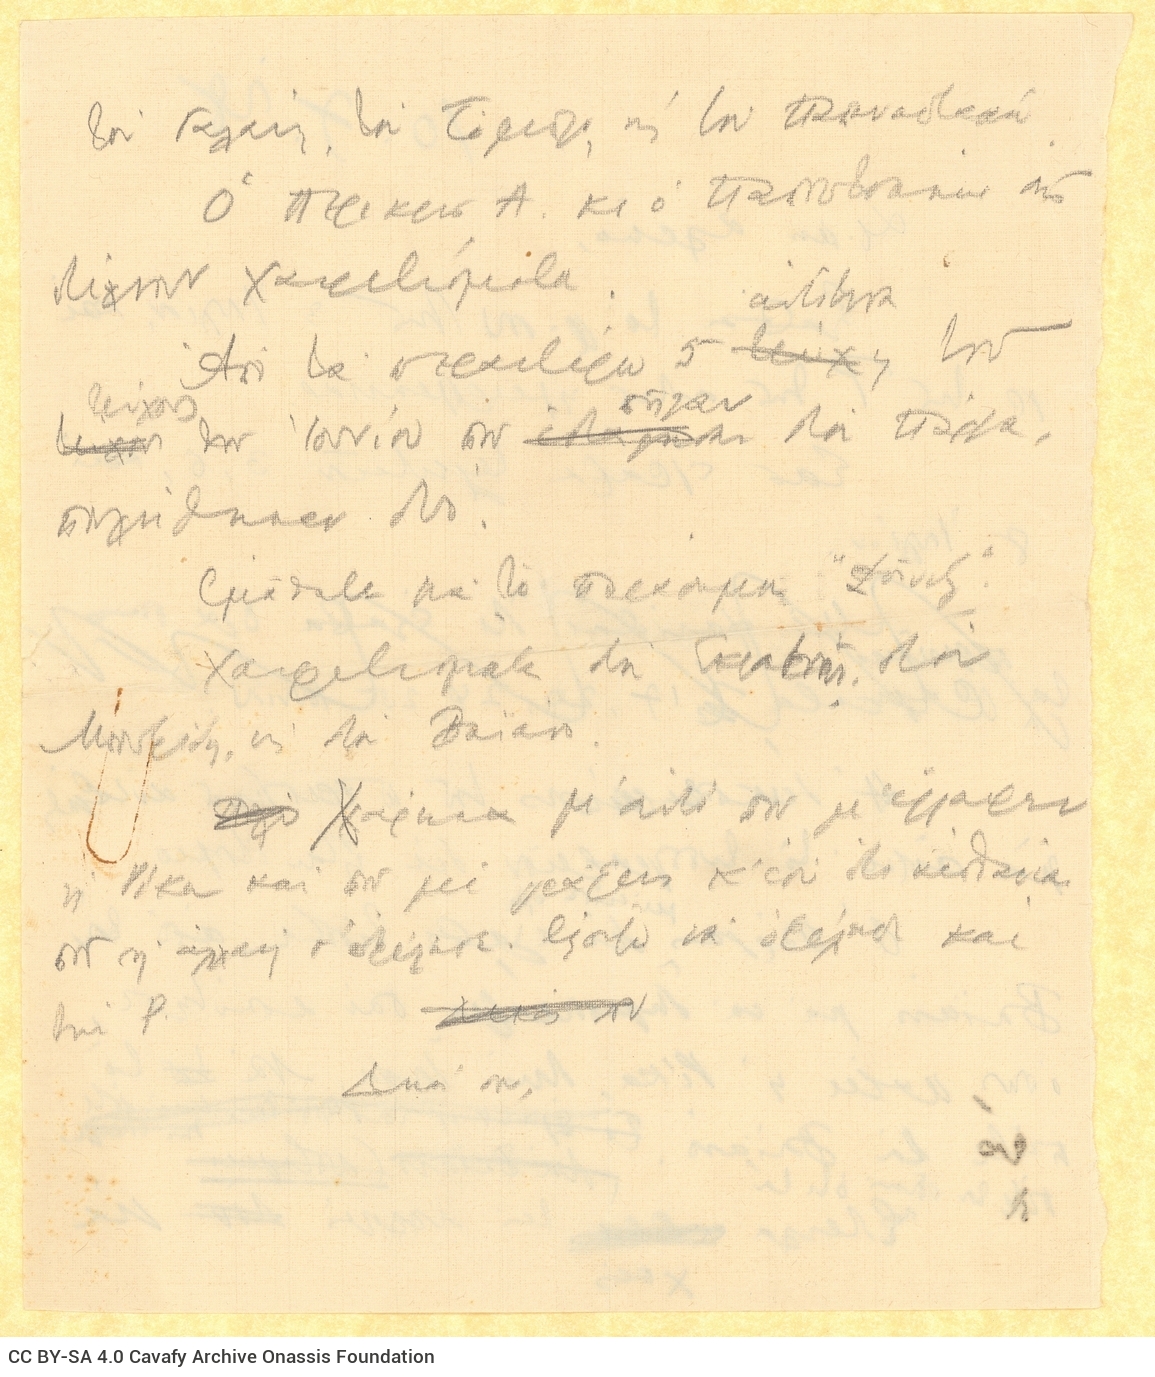 Handwritten draft letter to Alekos [Singopoulo] on both sides of a sheet. Cavafy refers to his correspondence with the Singop